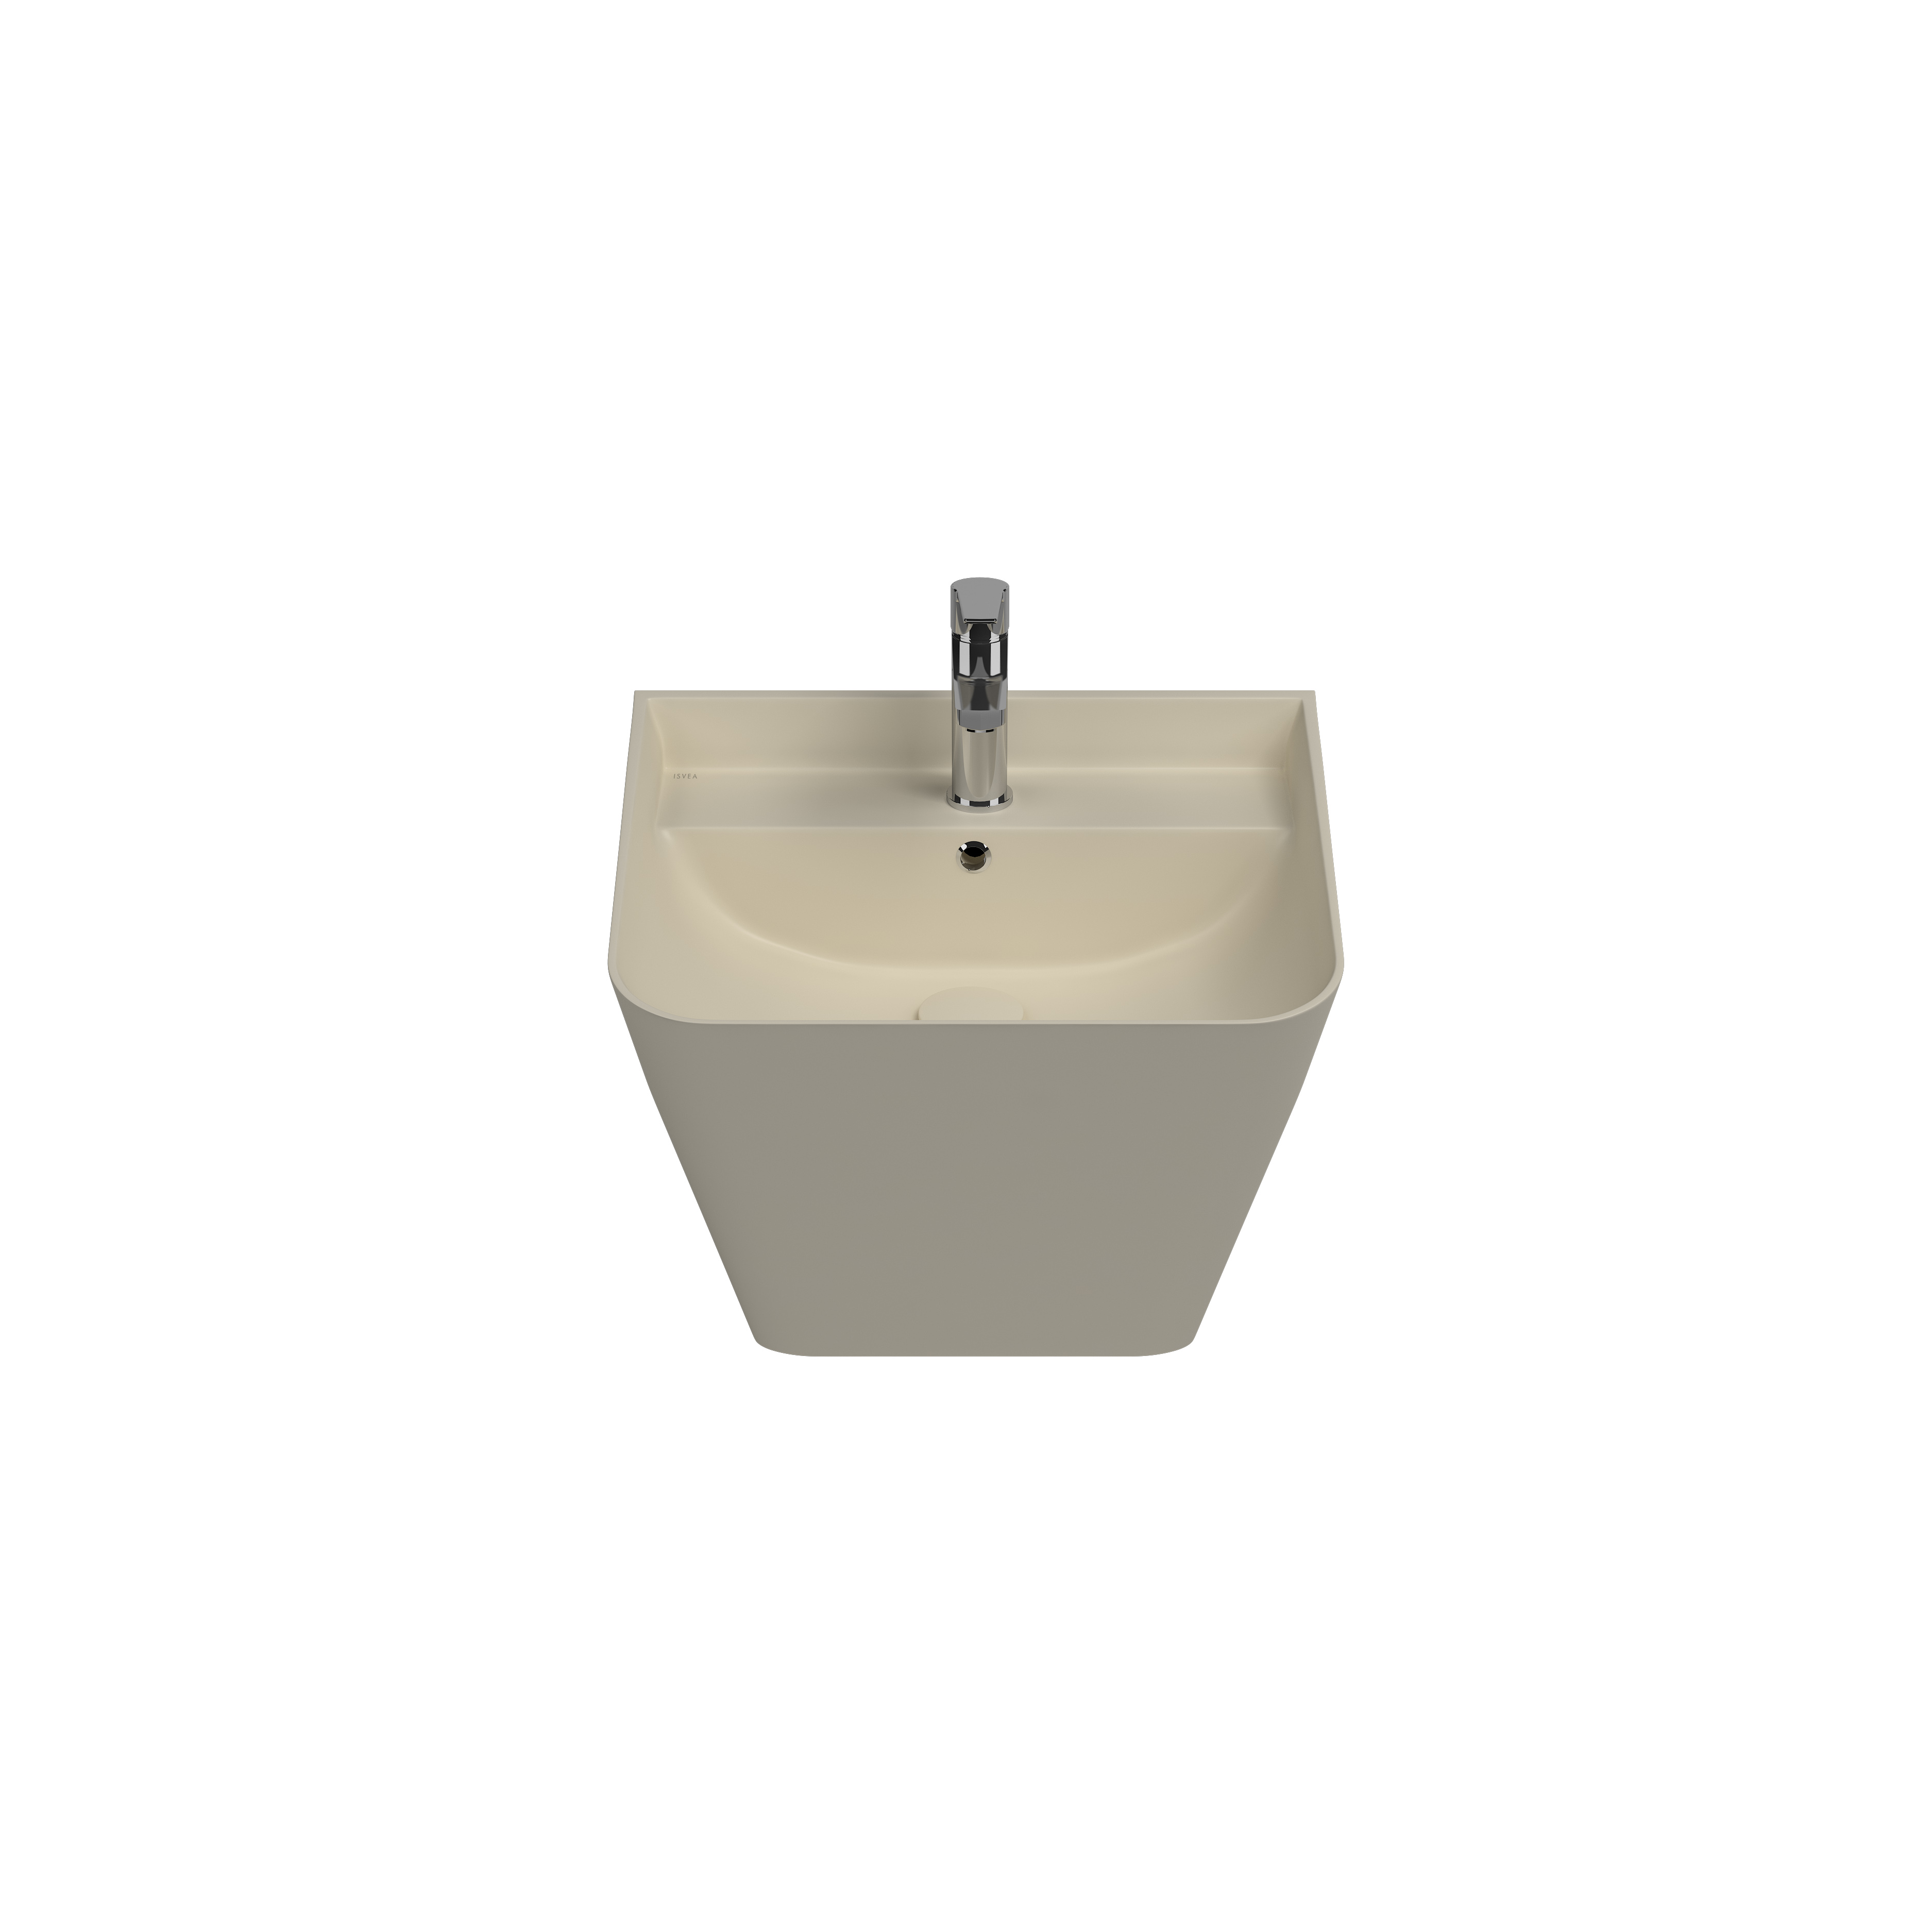 Sentimenti Neo Rimless Wall Hung WC Taupe